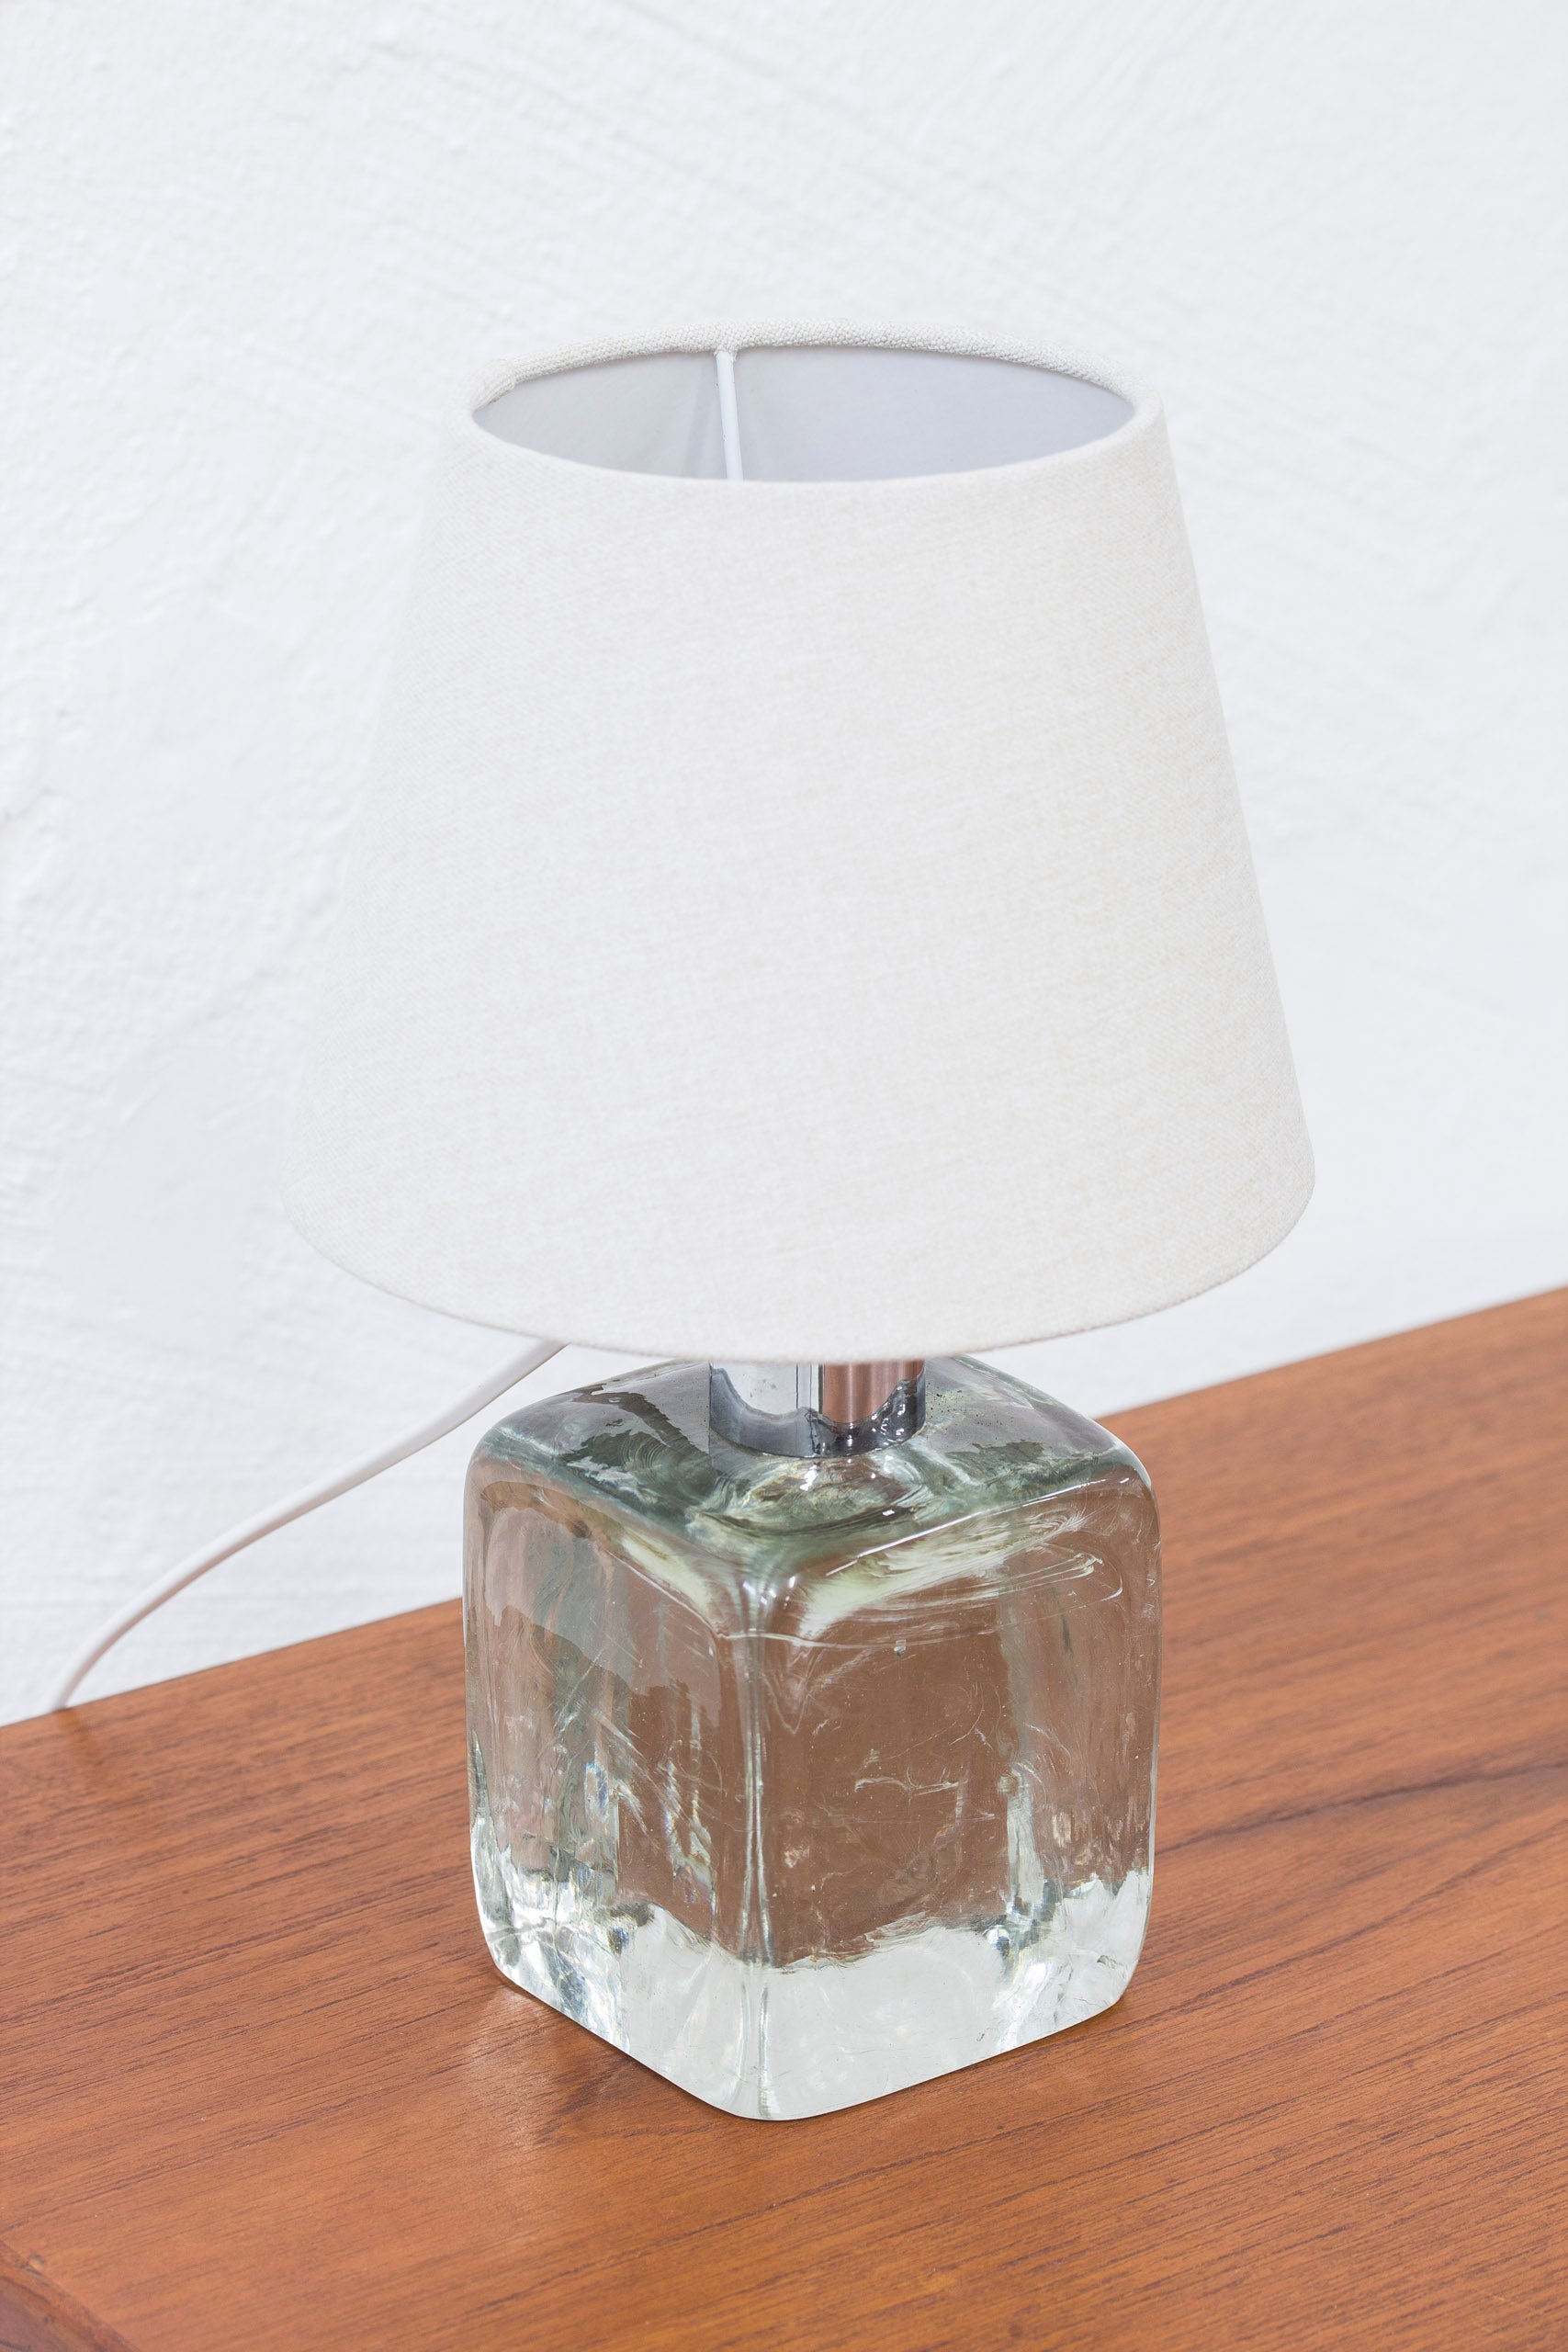 Early 1819 table lamp by Josef Frank